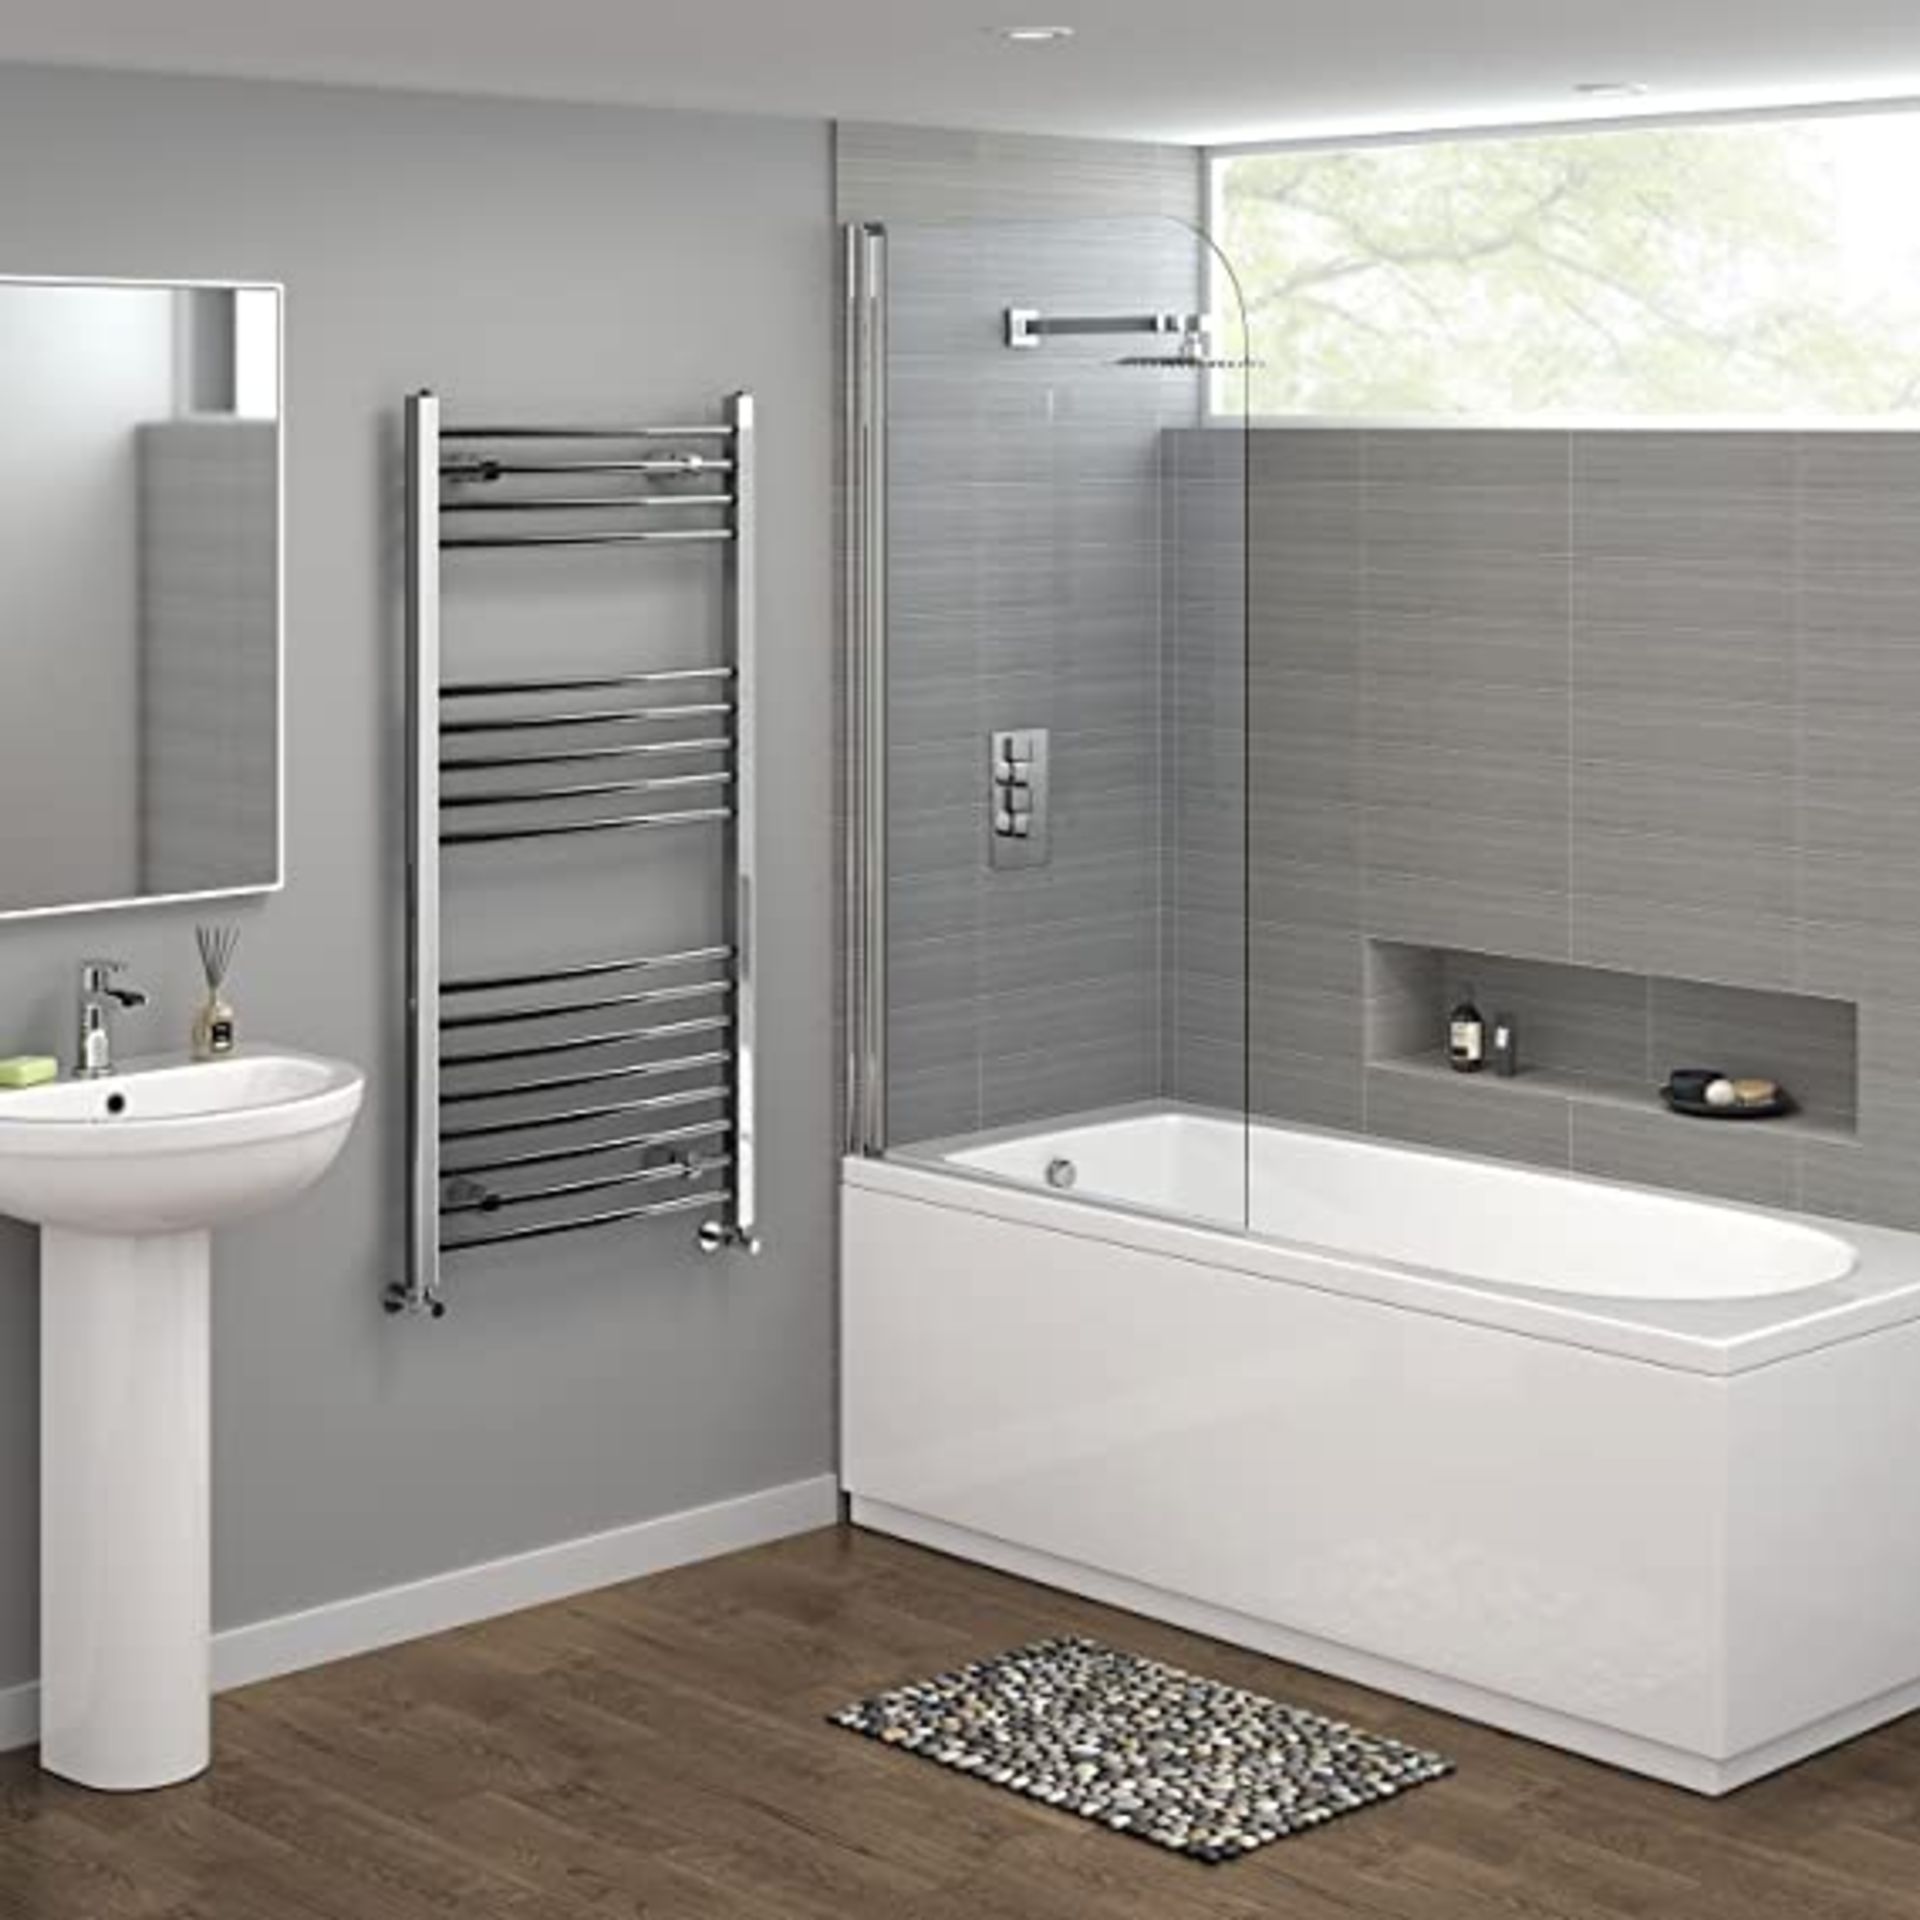 New 1200X600Mm - 20Mm Tubes - Chrome Curved Rail Ladder Towel Radiator.Nc1200600.Made From Chro... - Image 2 of 2